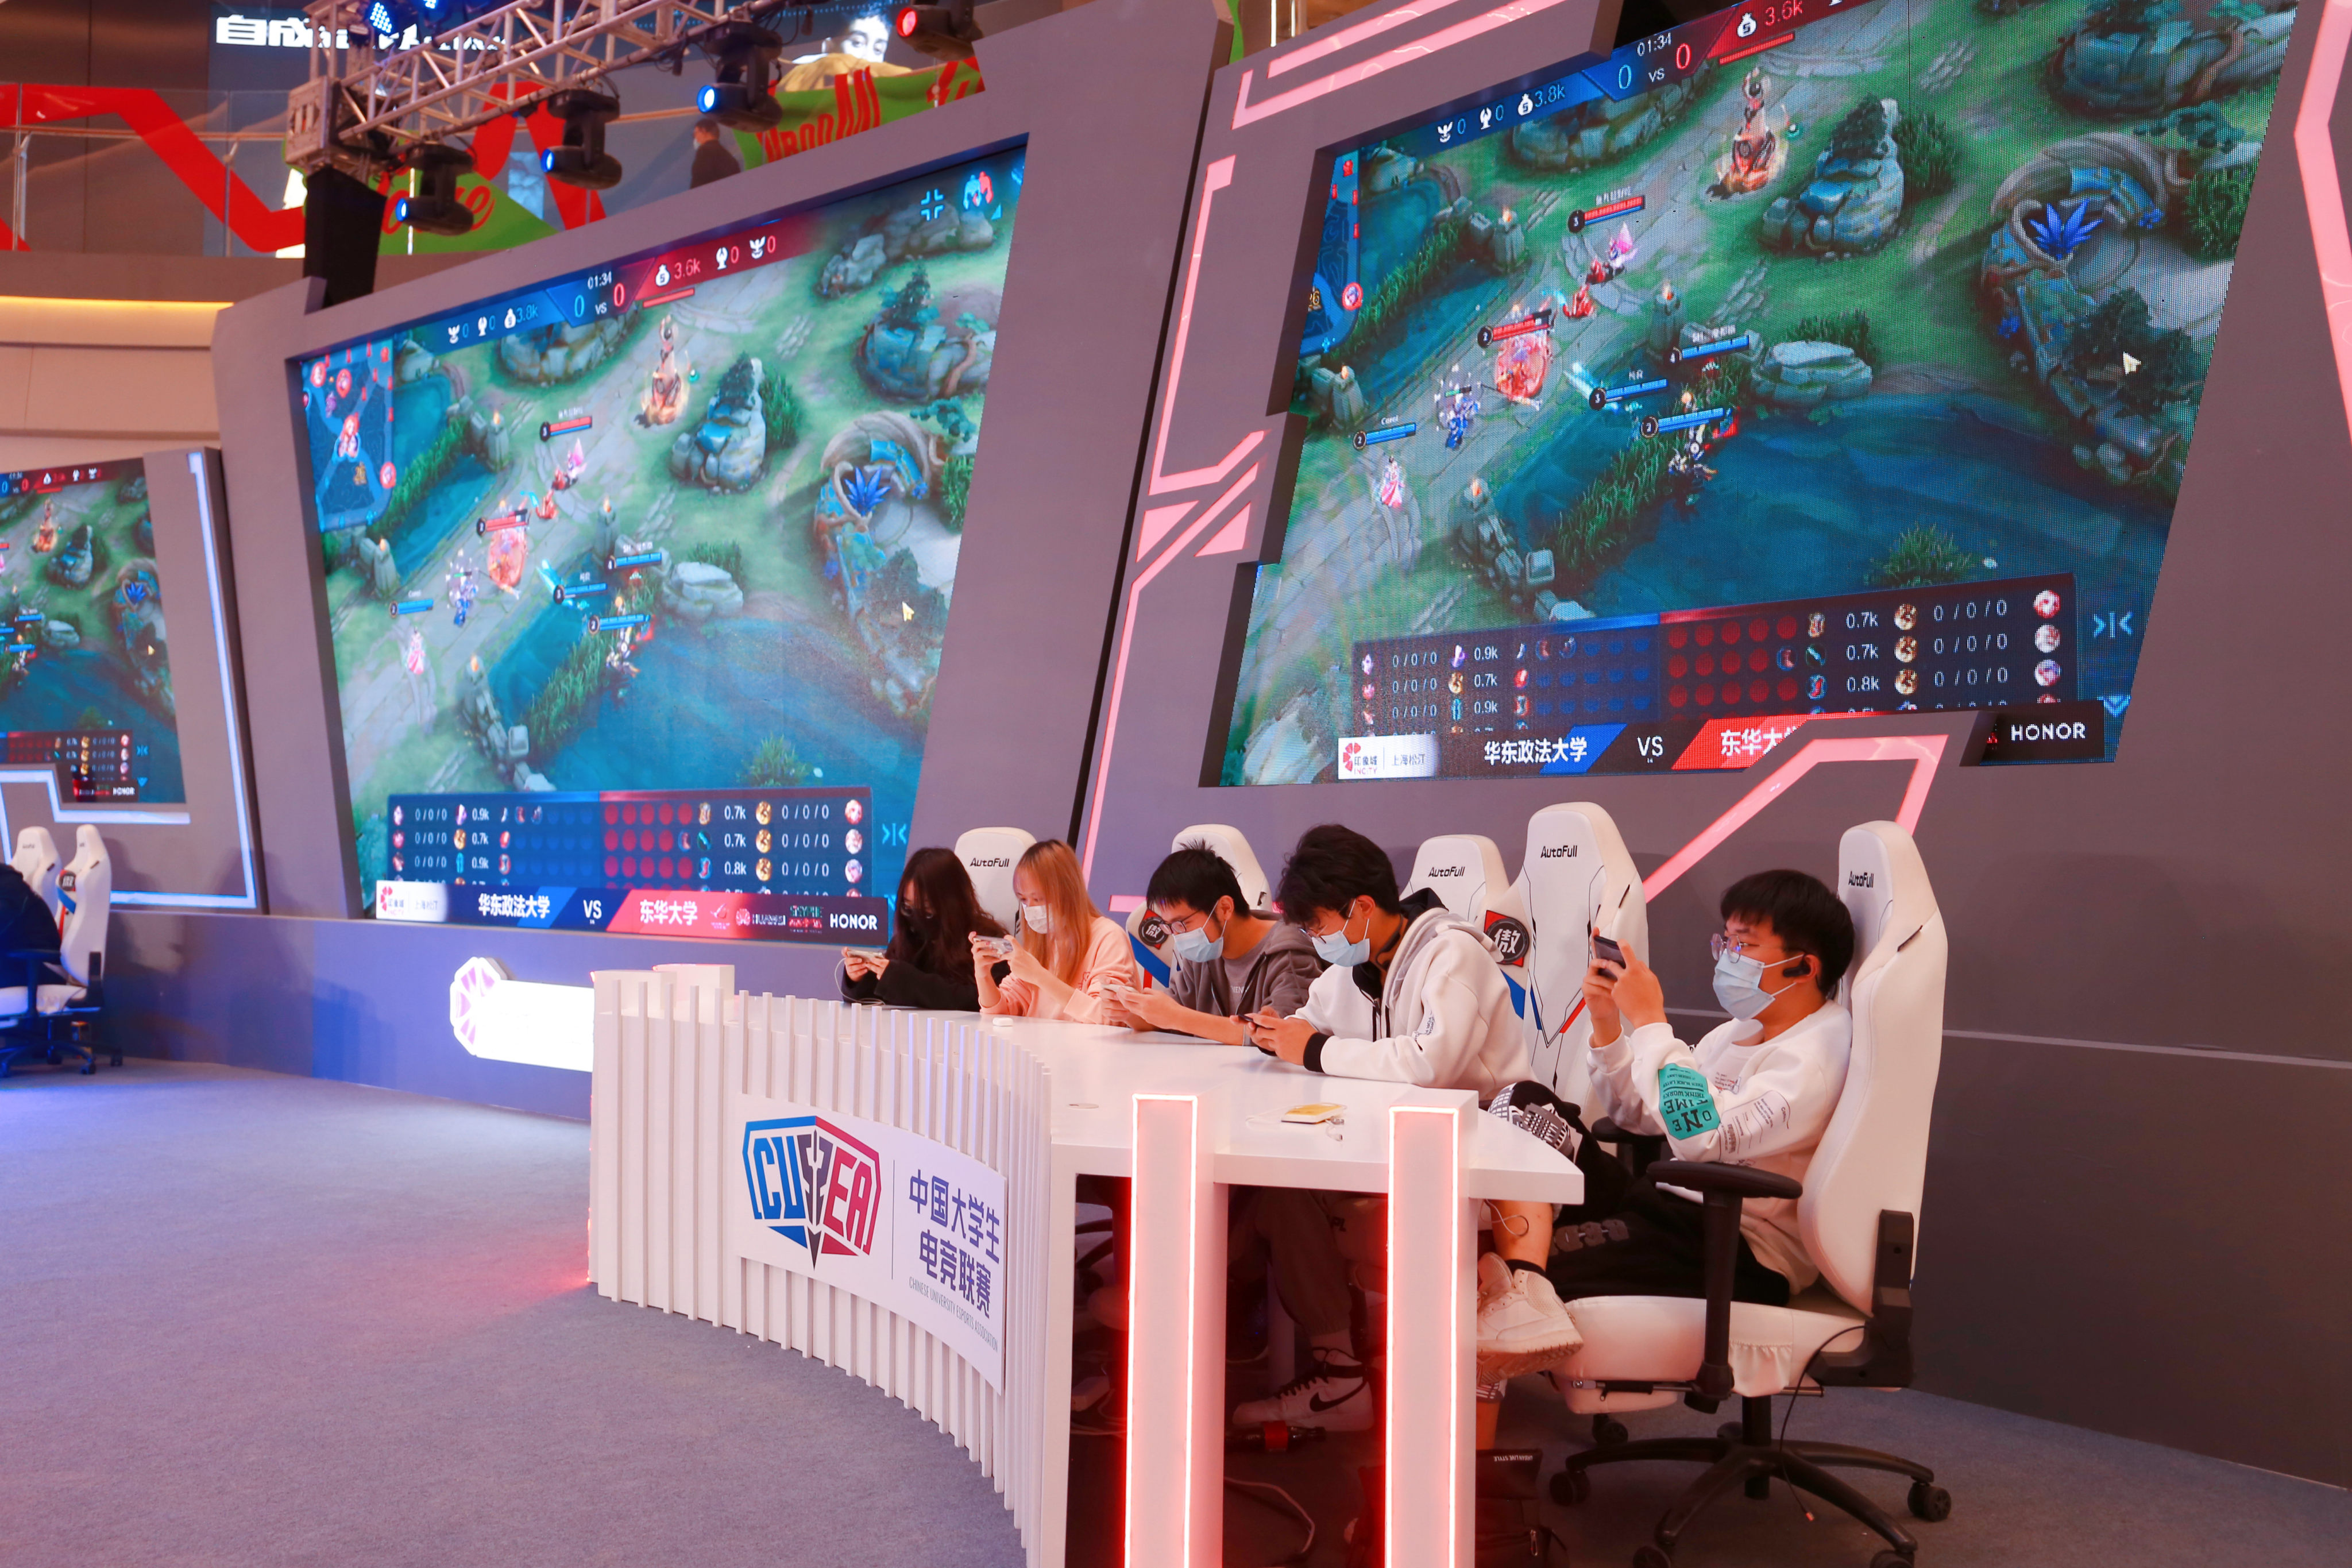 Gamers play with their smartphones during a Chinese University Esports league match in Shanghai in November 2021. Photo: Costfoto/Barcroft Media via Getty Images